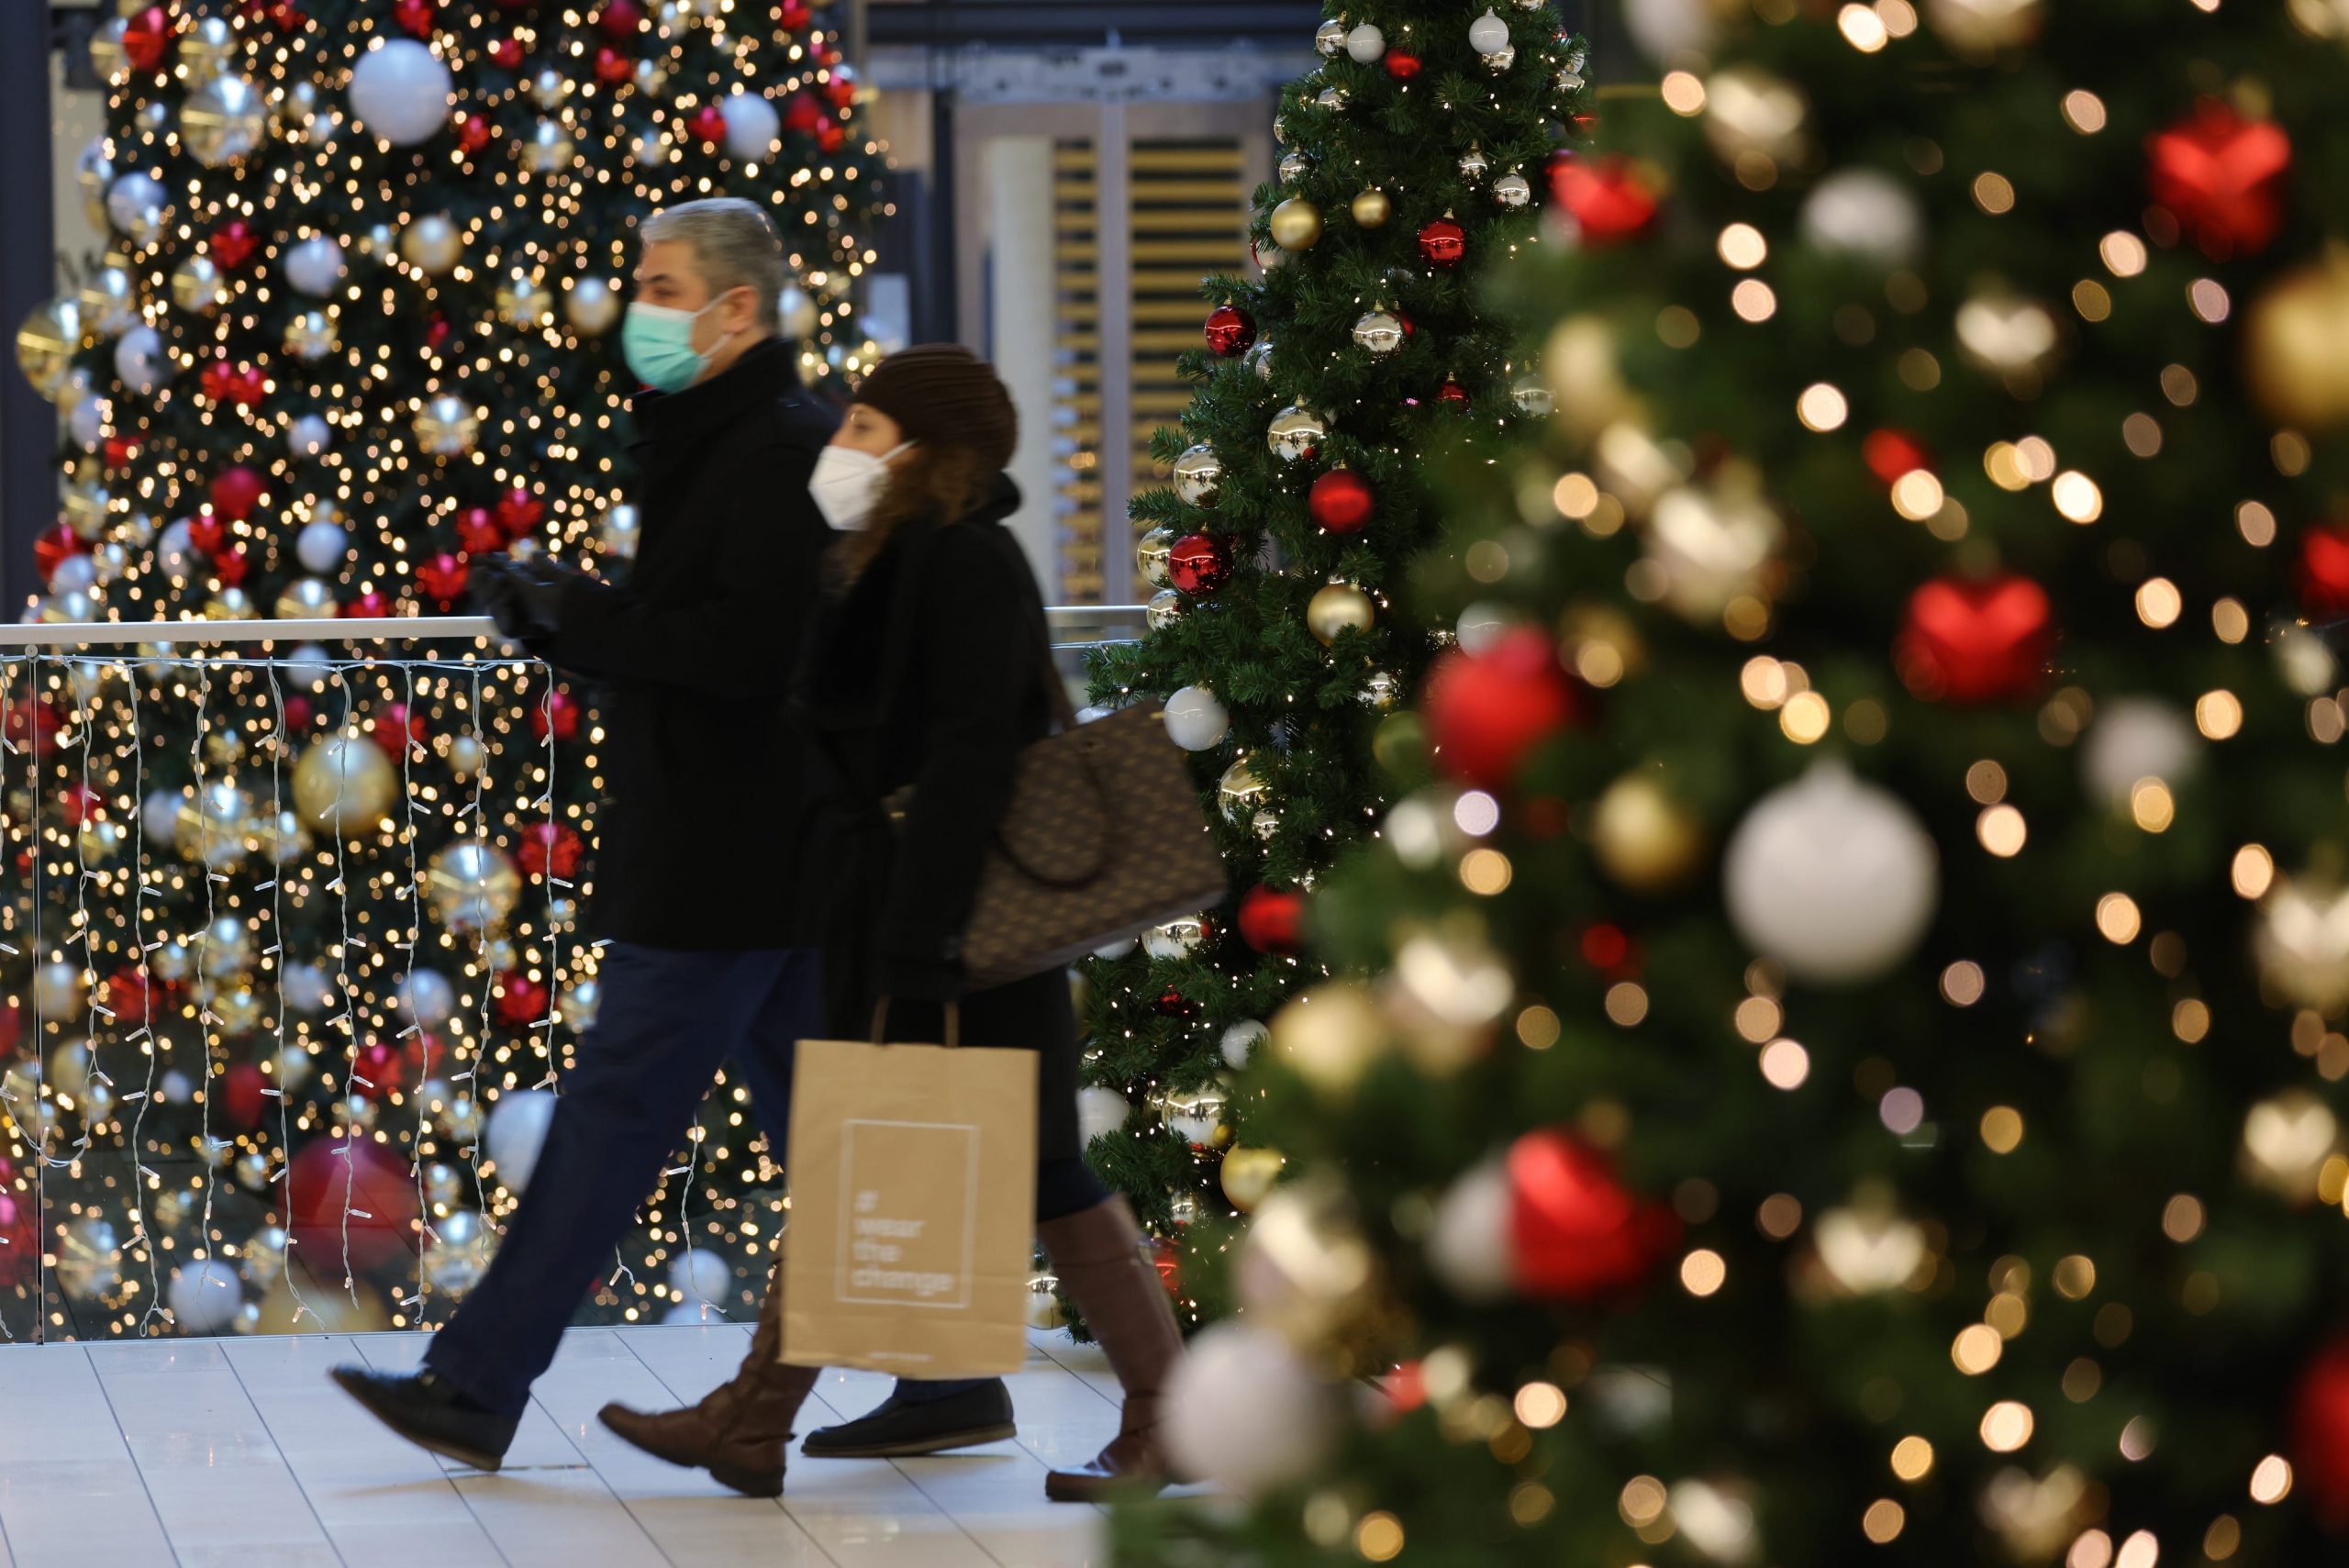 Shoppers at a mall in Germany with Christmas trees decorated in red and gold around.